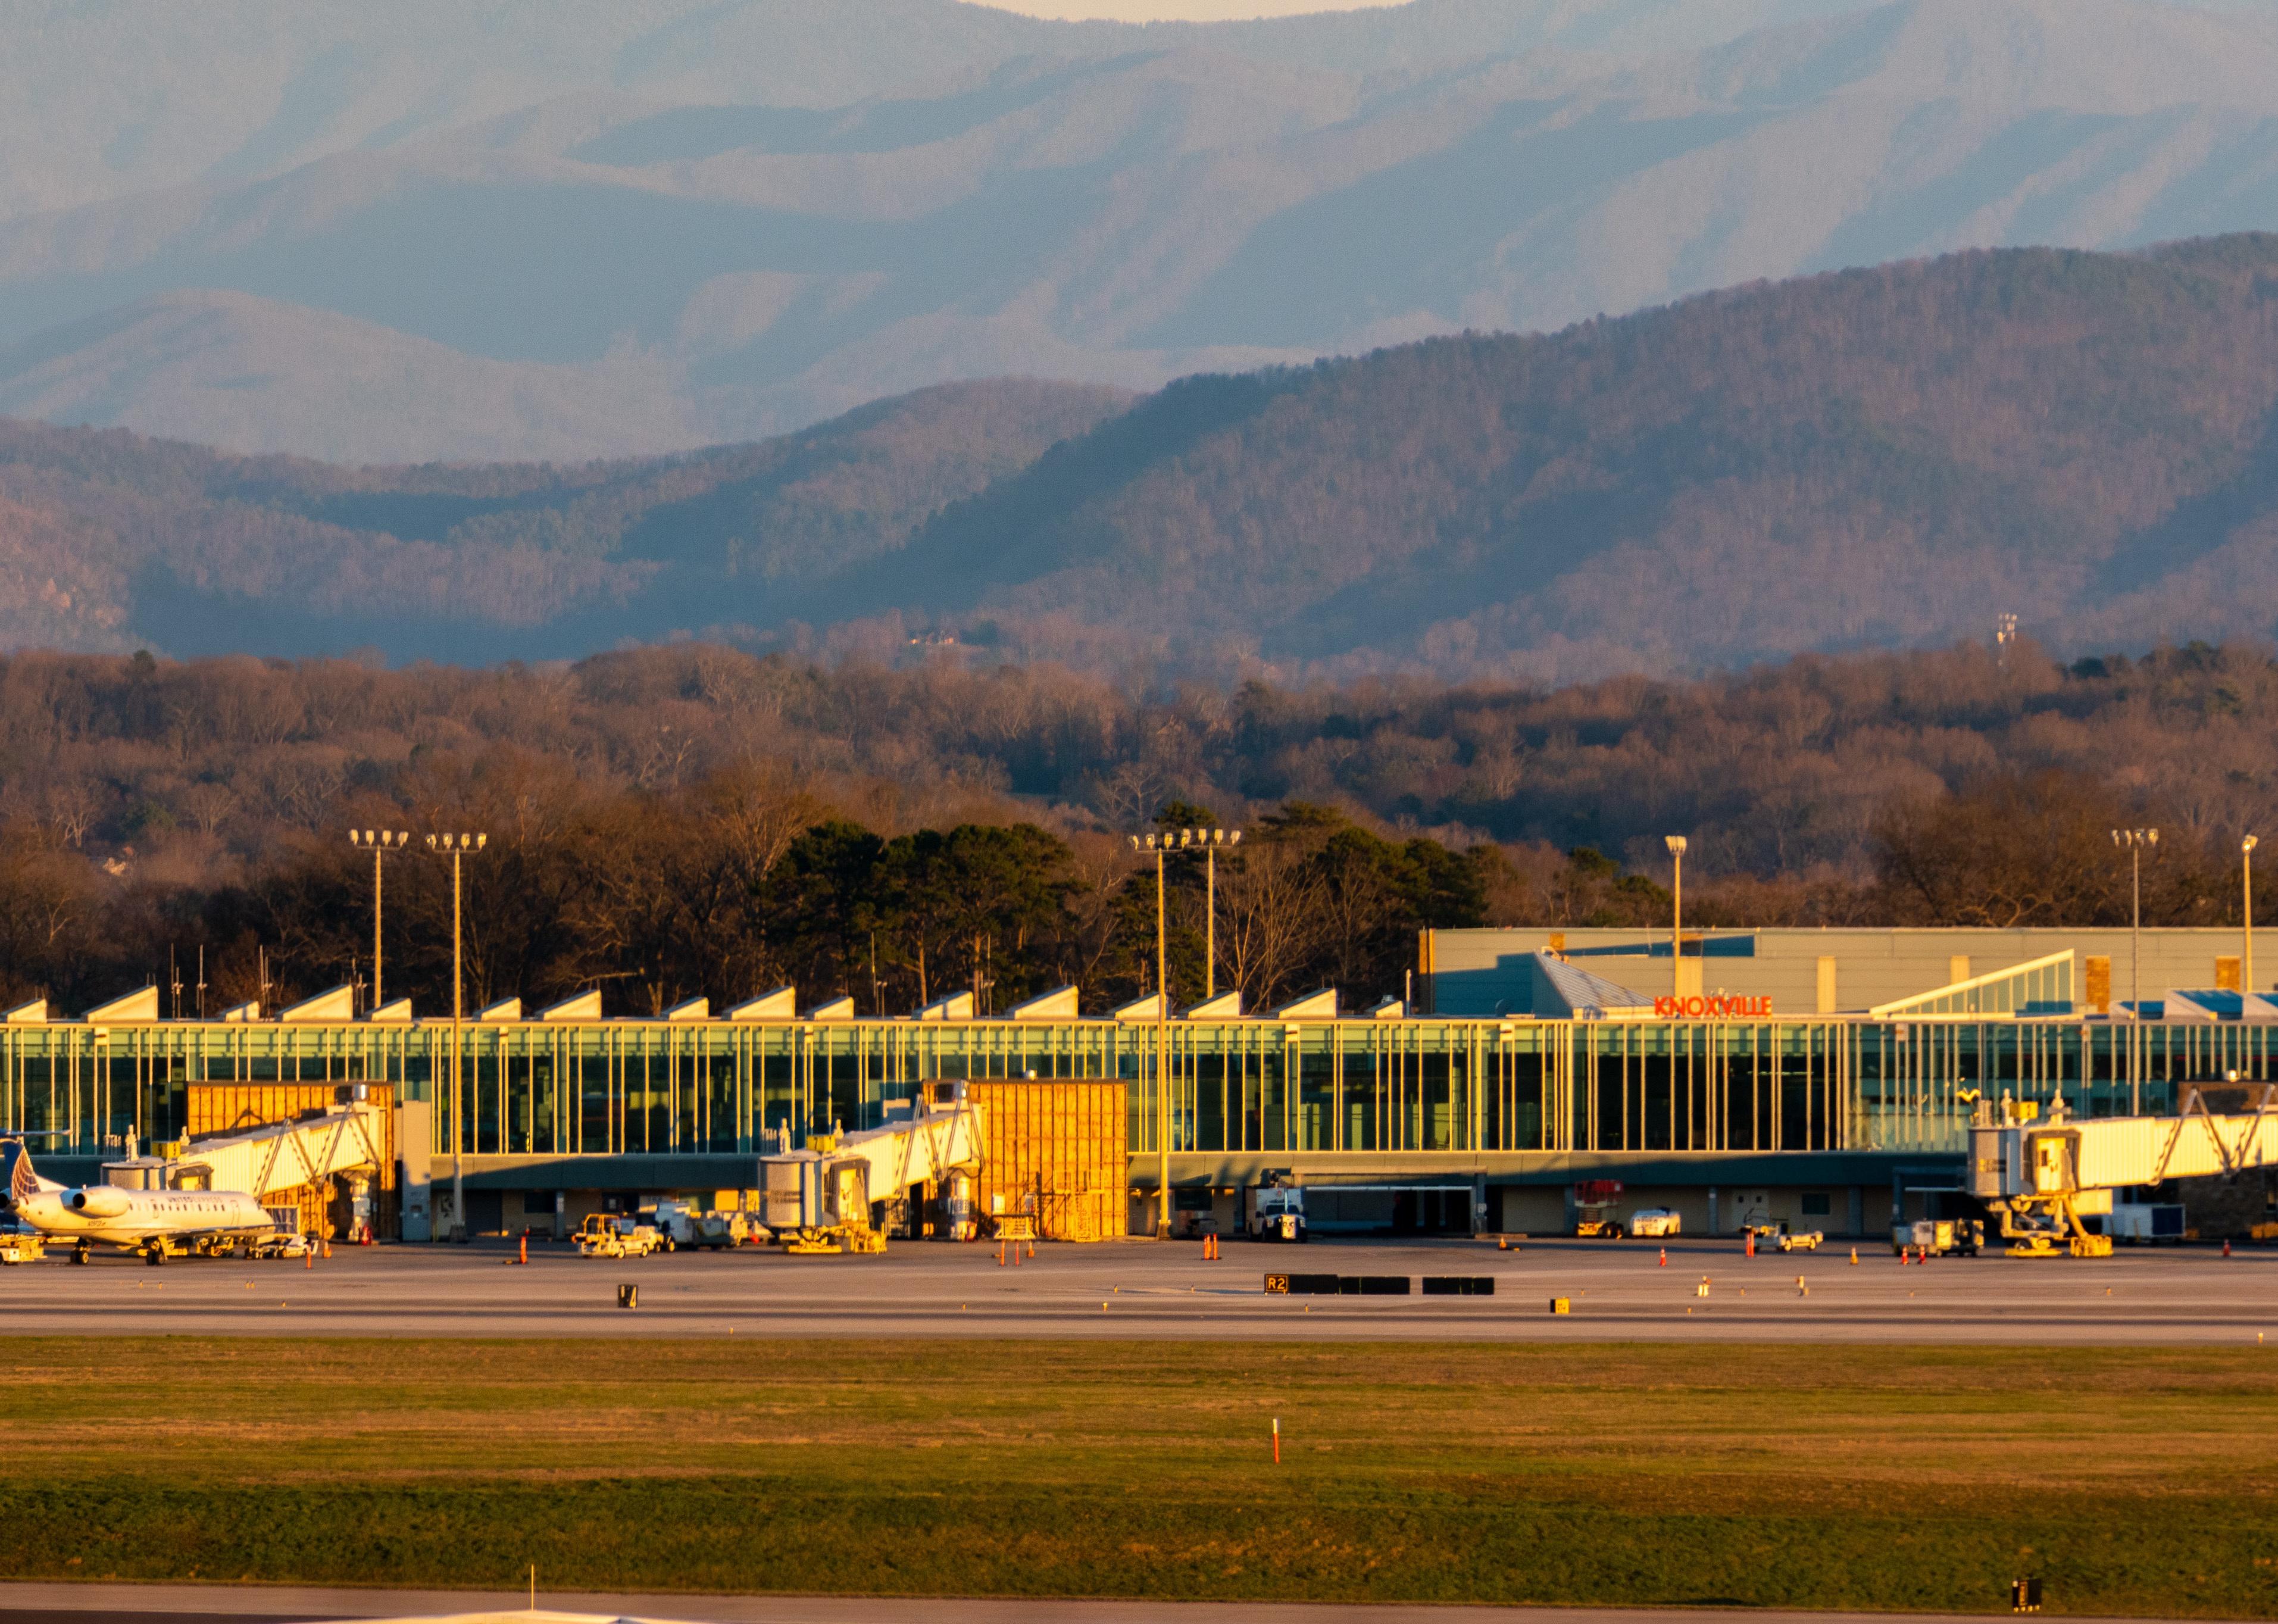 A panoramic view of the outside of McGhee Tyson airport.